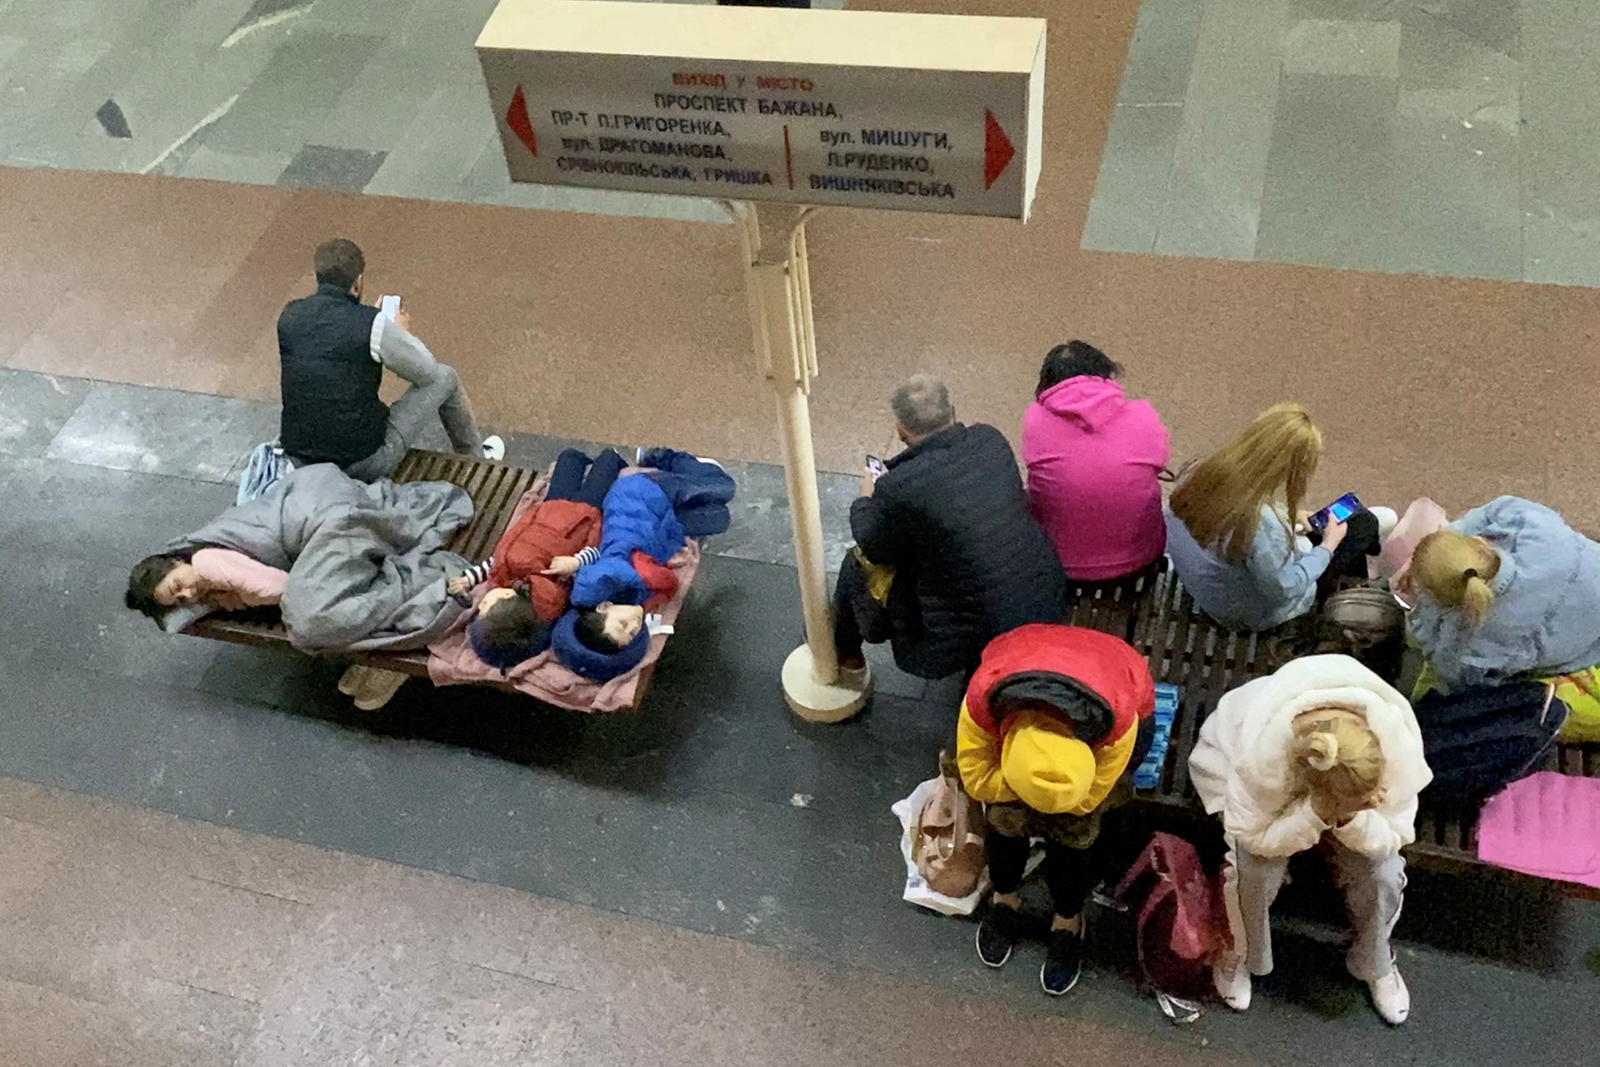 This screen grab shows people taking shelter in a subway station in Kyiv, Ukraine, on June 2.